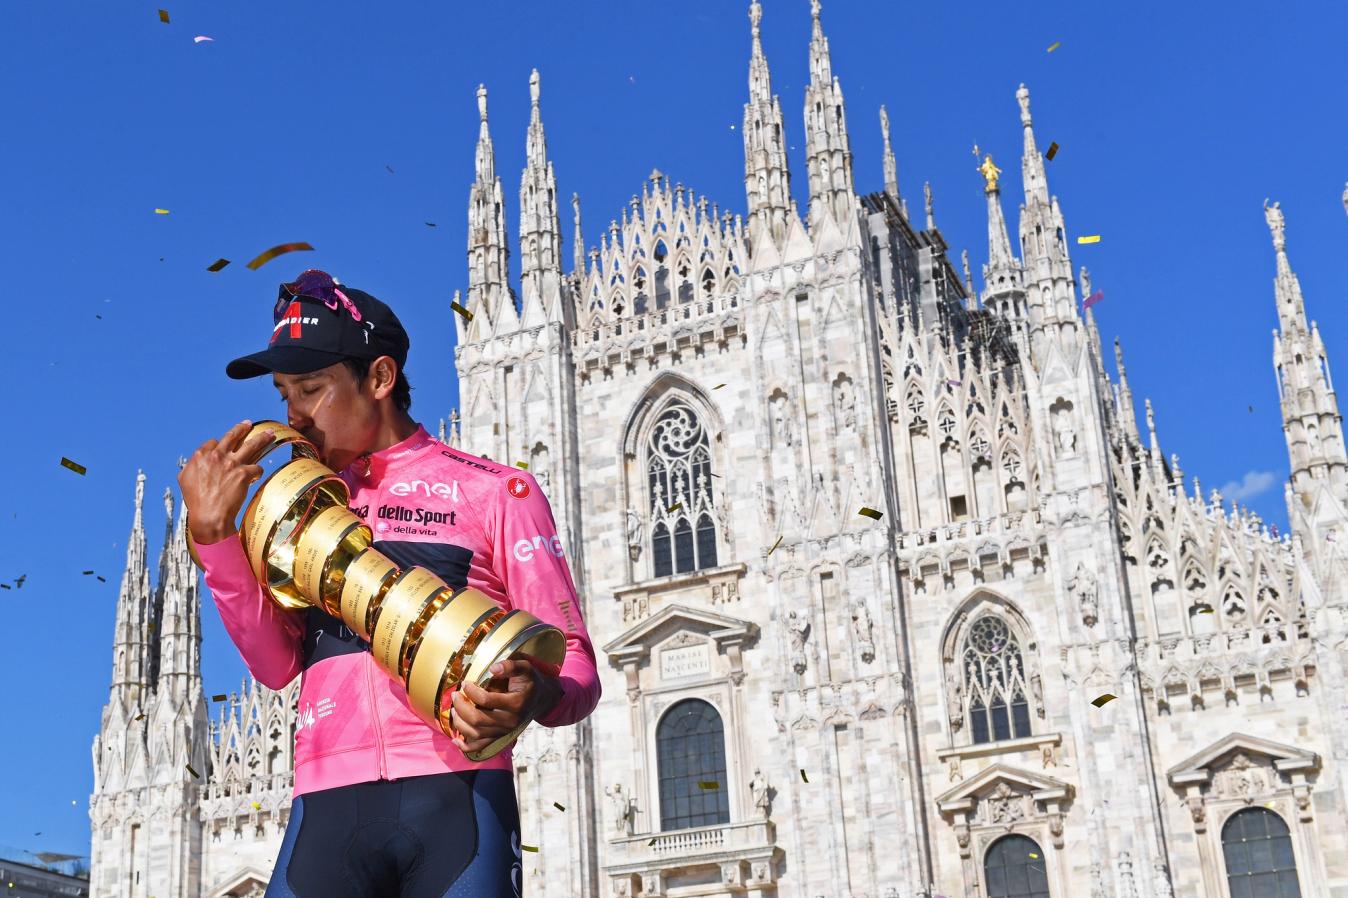 Egan Bernal's 2021 Giro d'Italia was a special one, having come back from multiple back injuries. Can he produce another remarkable rise?